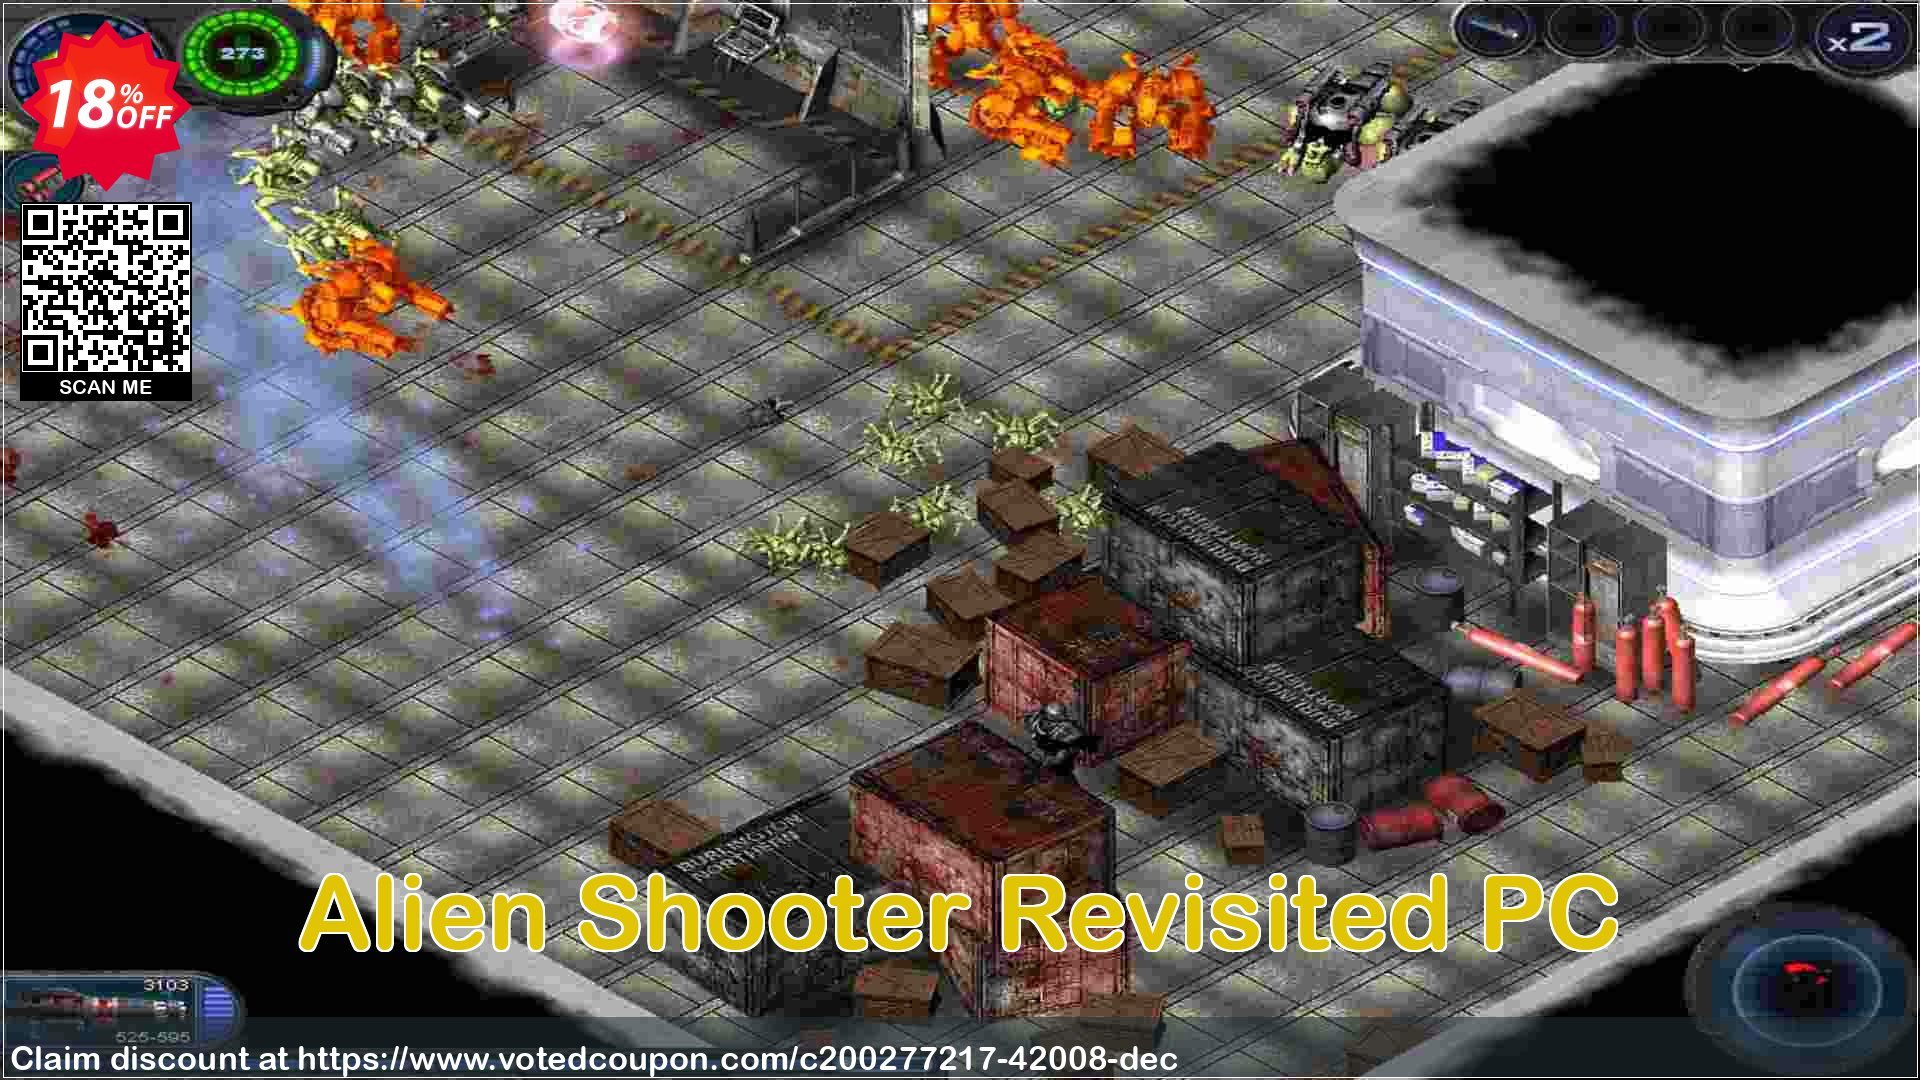 Alien Shooter Revisited PC Coupon Code May 2024, 18% OFF - VotedCoupon